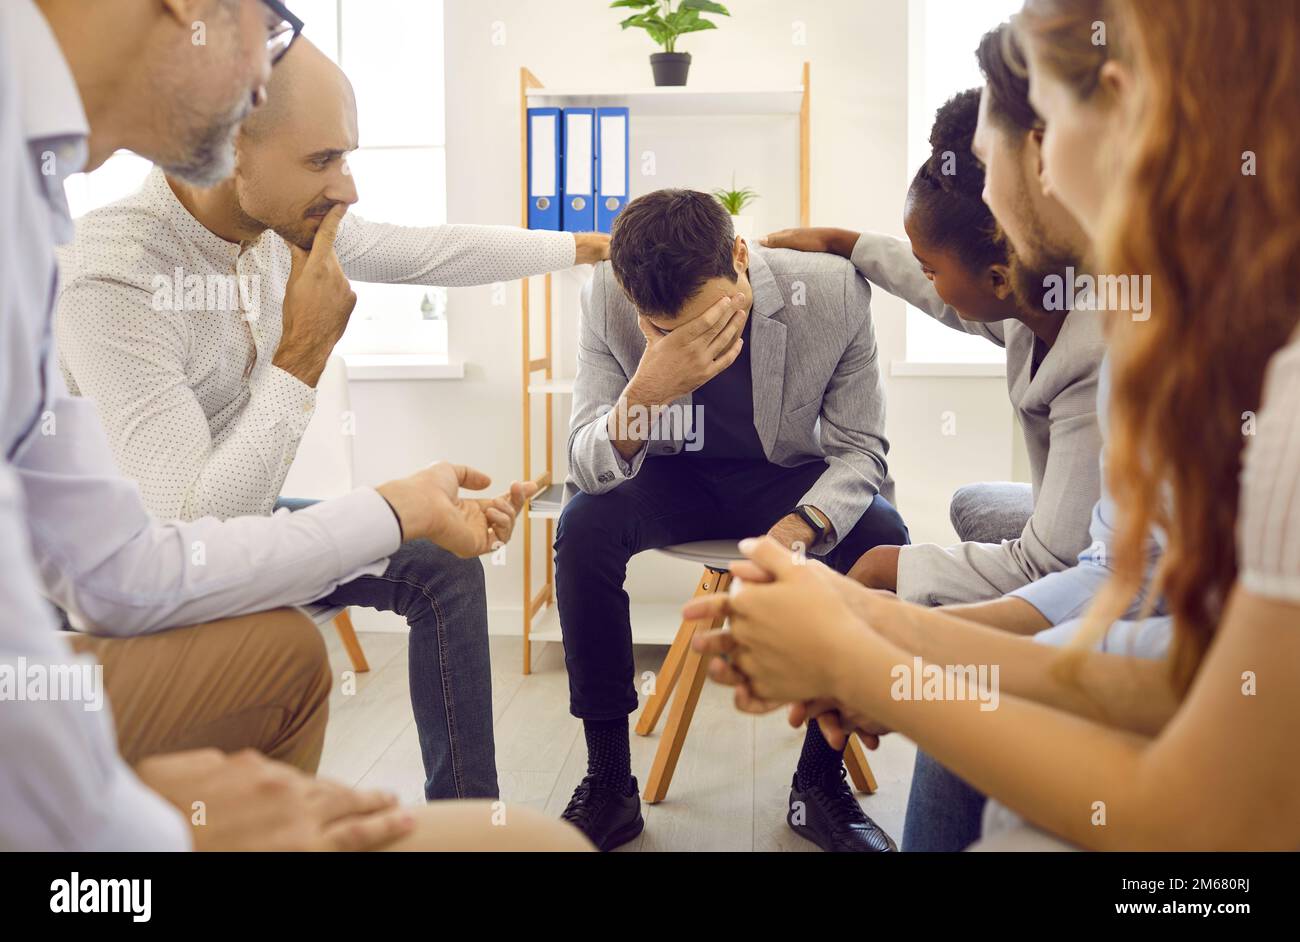 Sad man at support group therapy session sitting with head down and participants touch shoulders. Stock Photo